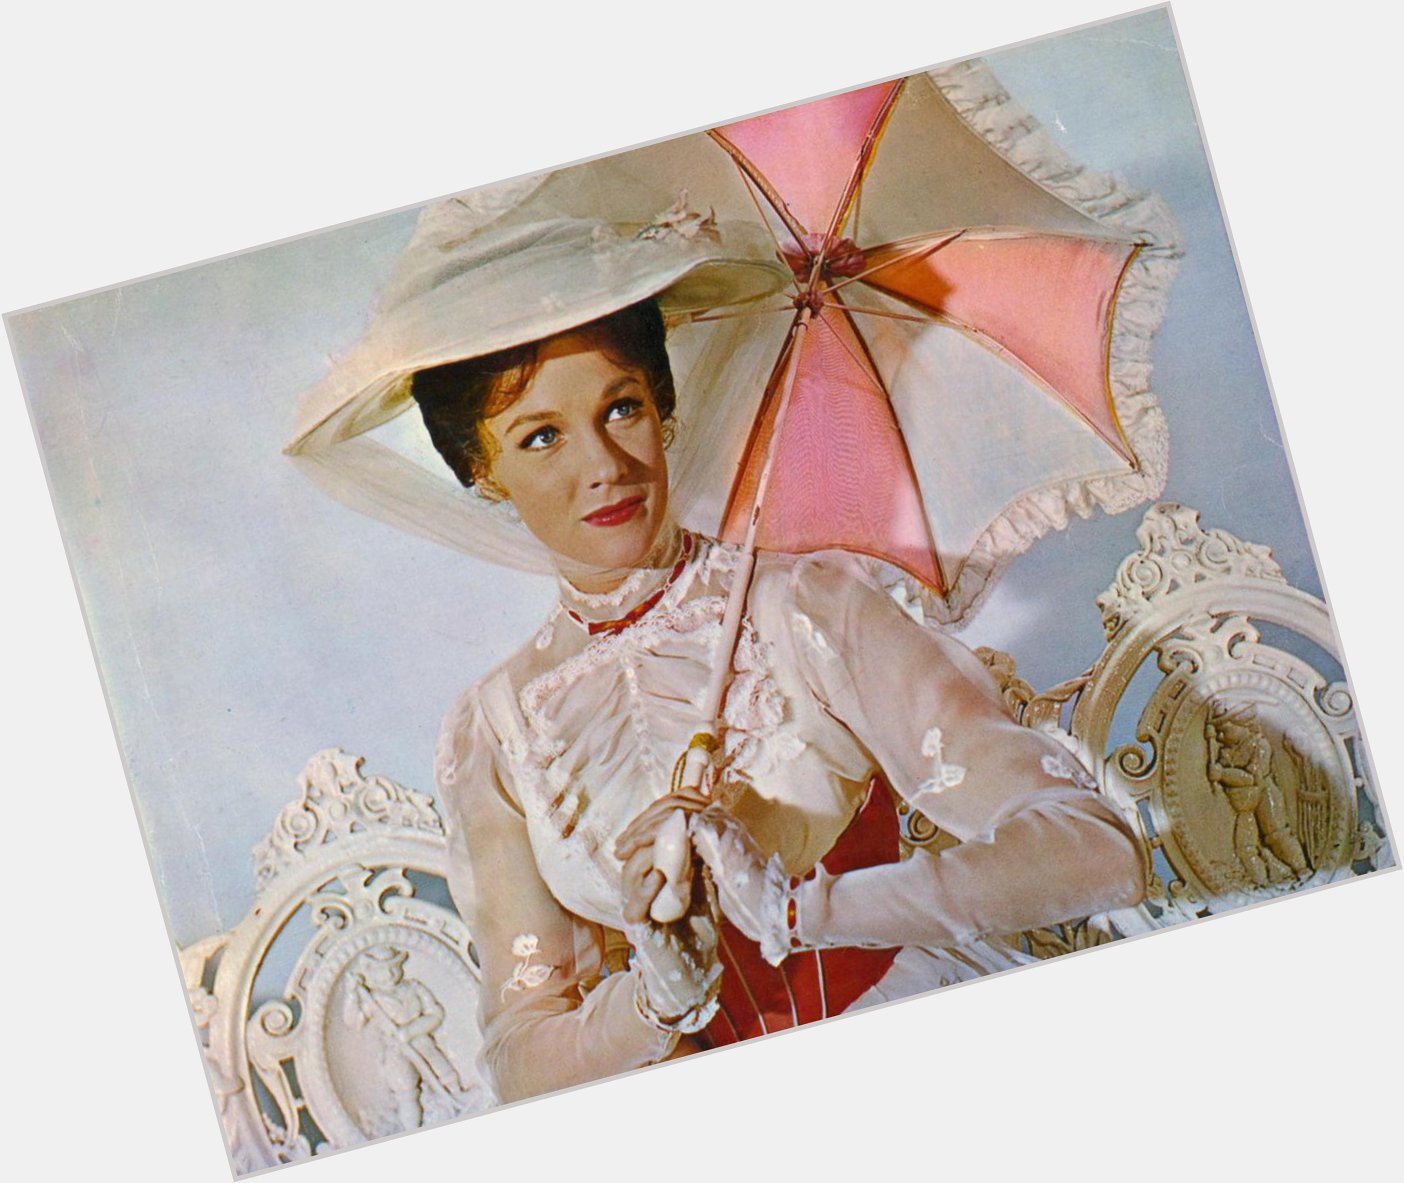 Happy Birthday to a true star, who has touched my life in so many positive ways. Julie Andrews. 